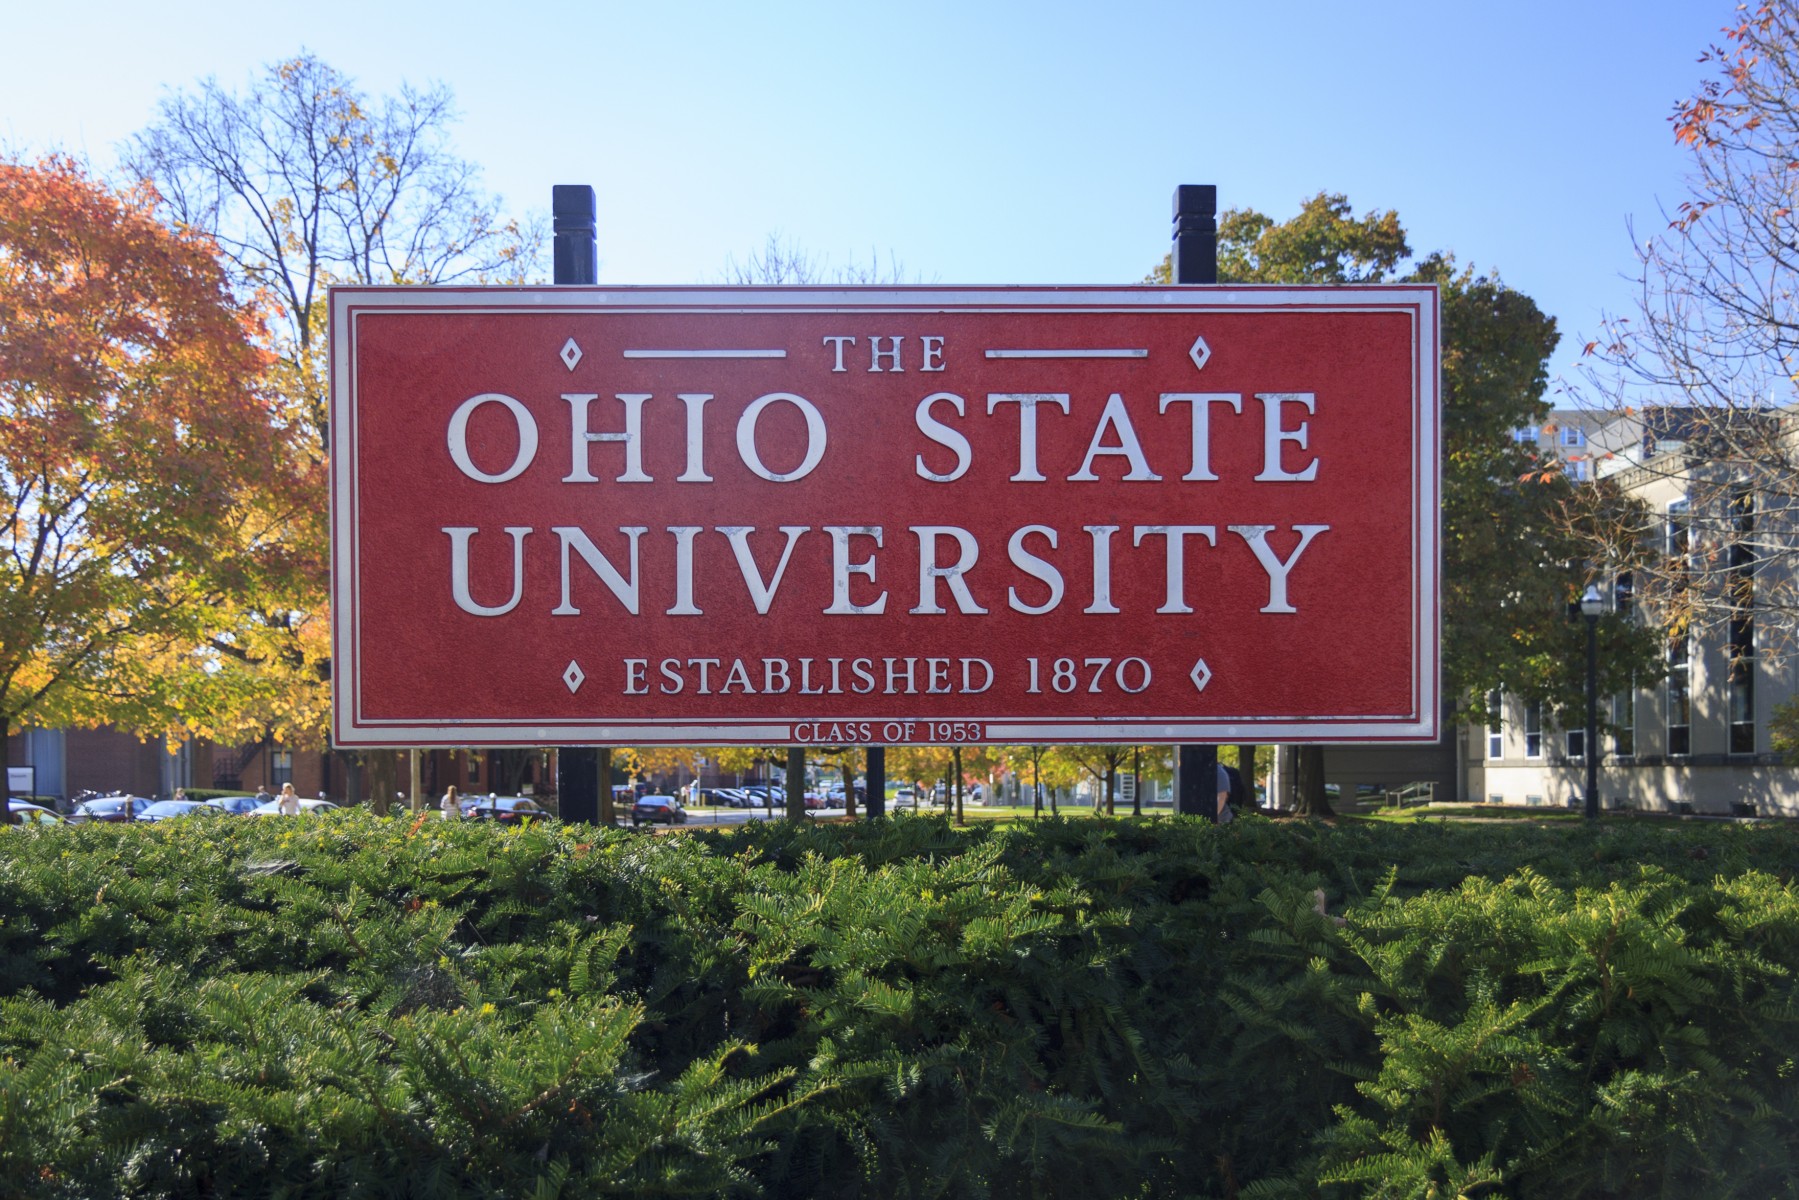 ohio-state-university-past-exams-and-midterms-spring-2019-oneclass-blog